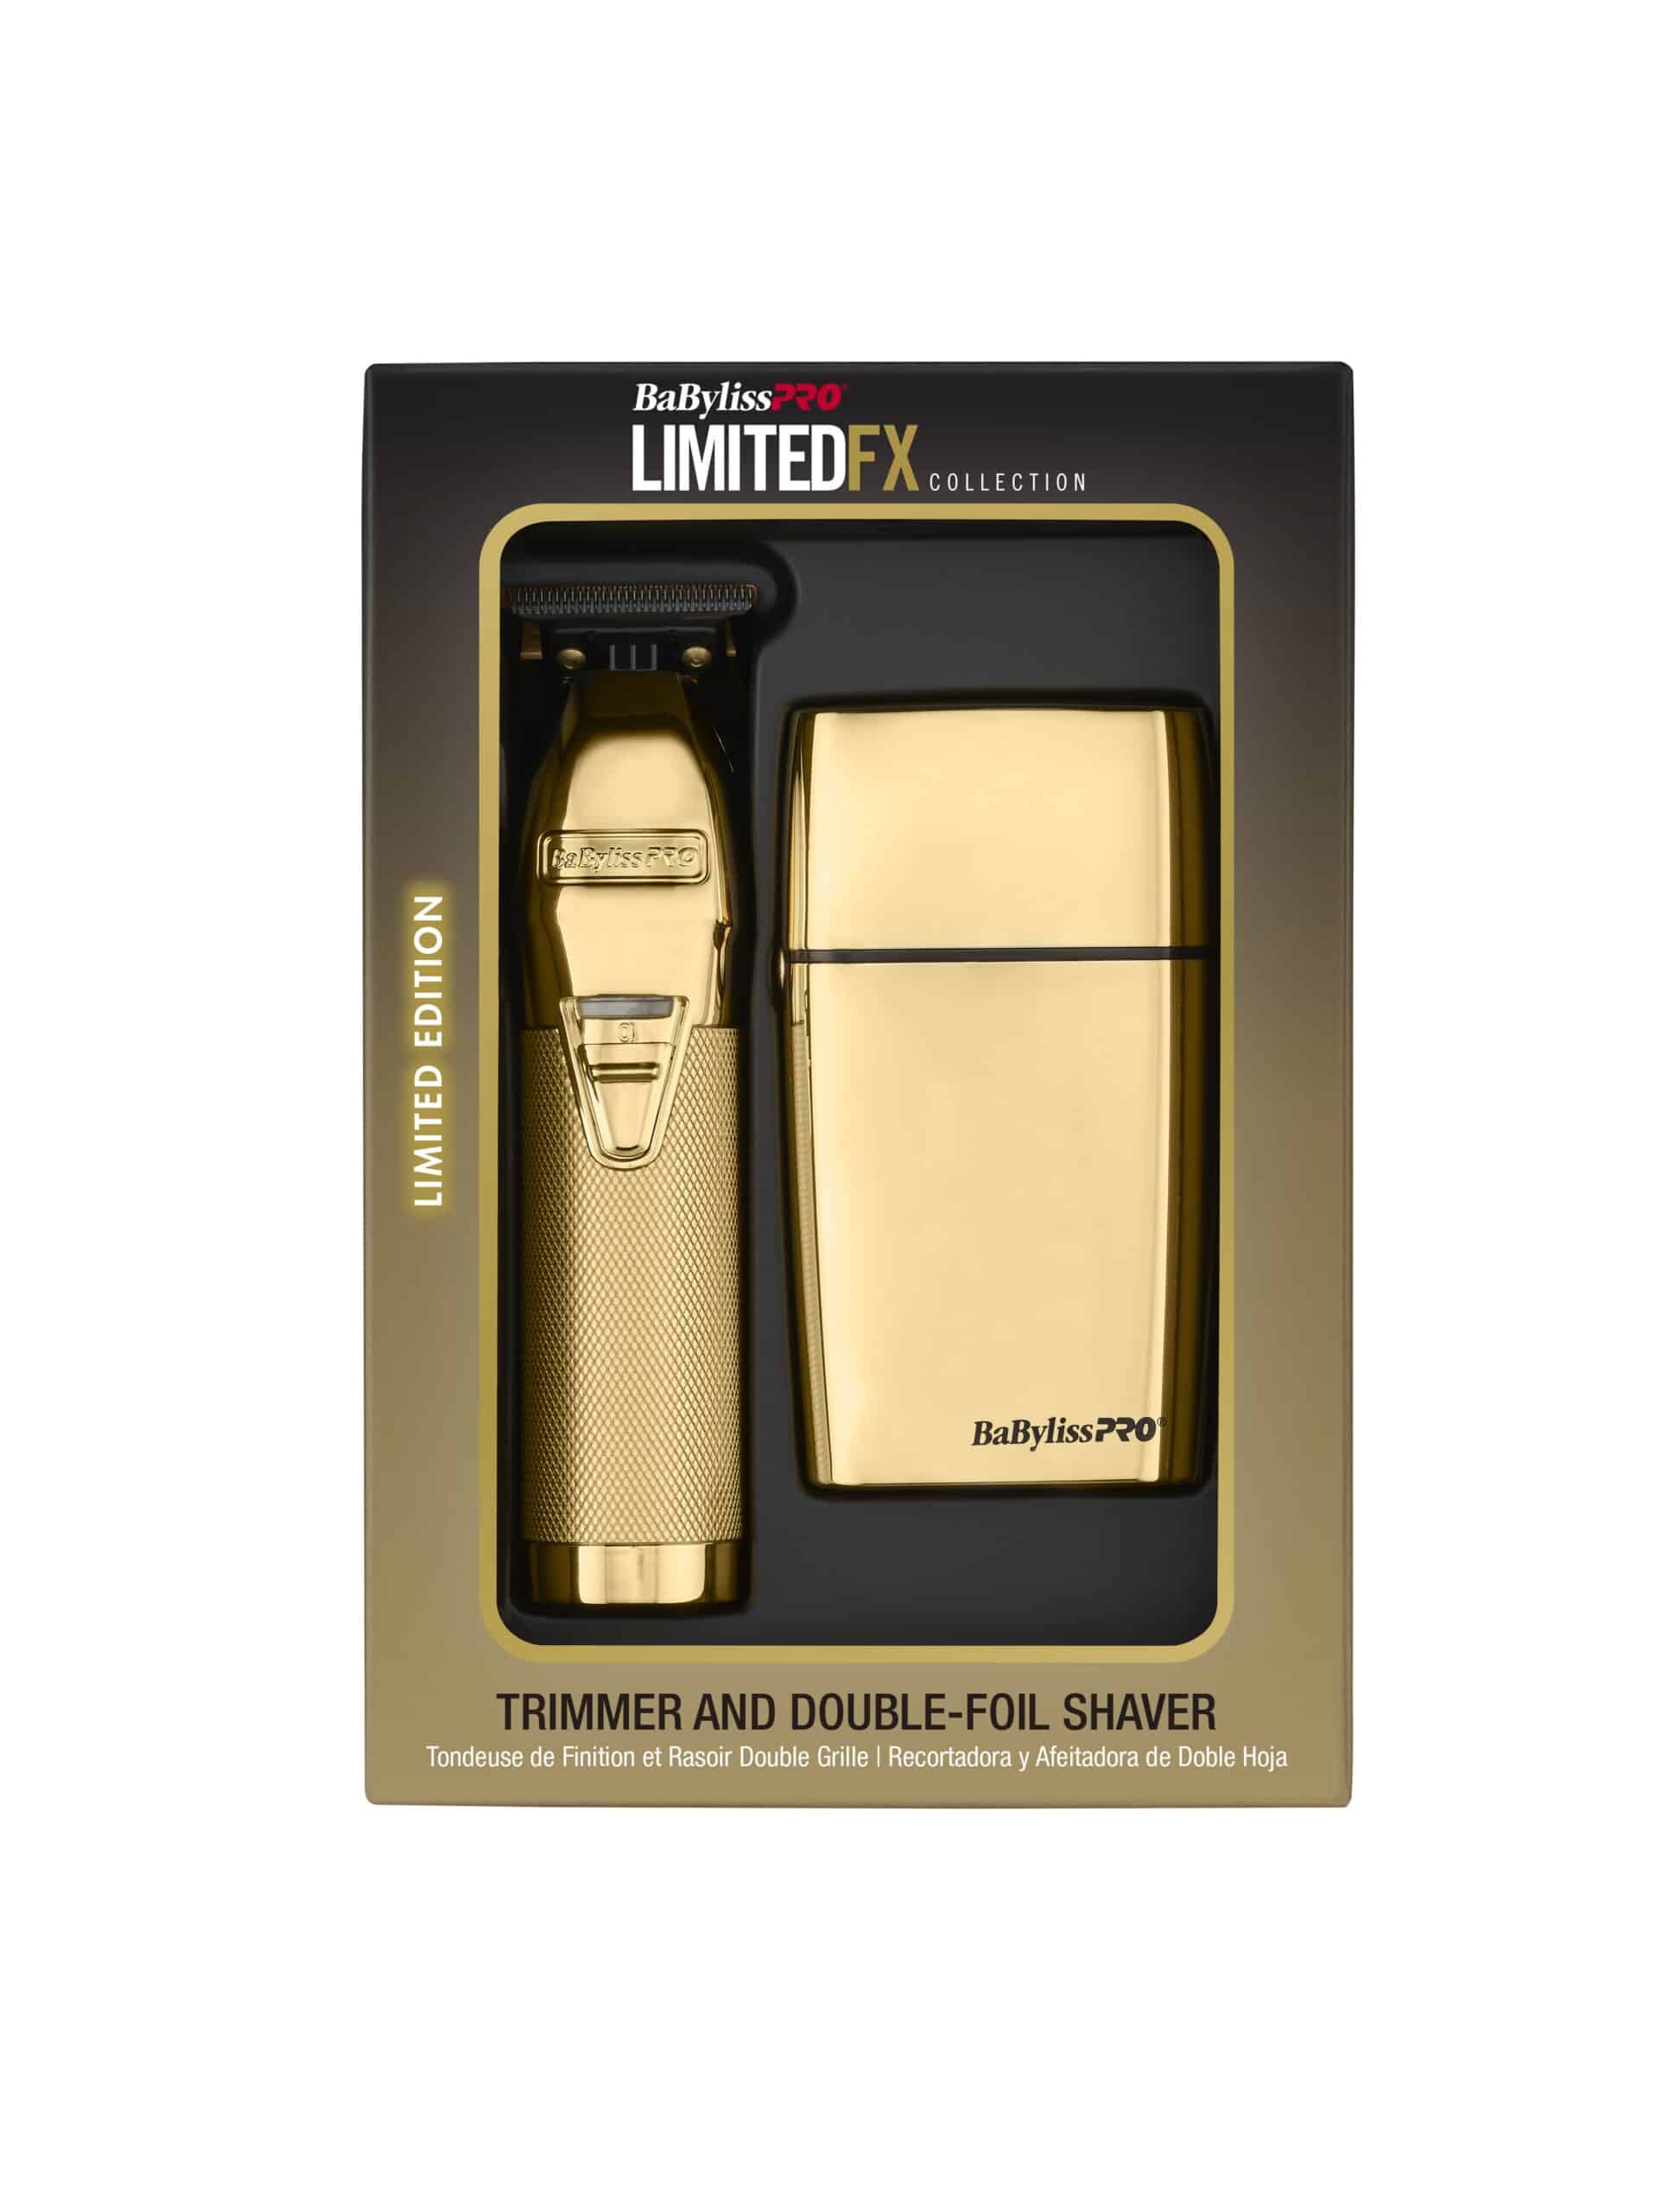 BabylissPro Limited Edition Gold Trimmer and Double Foil Shaver Value Pack #FXDUOFS2TG - package front